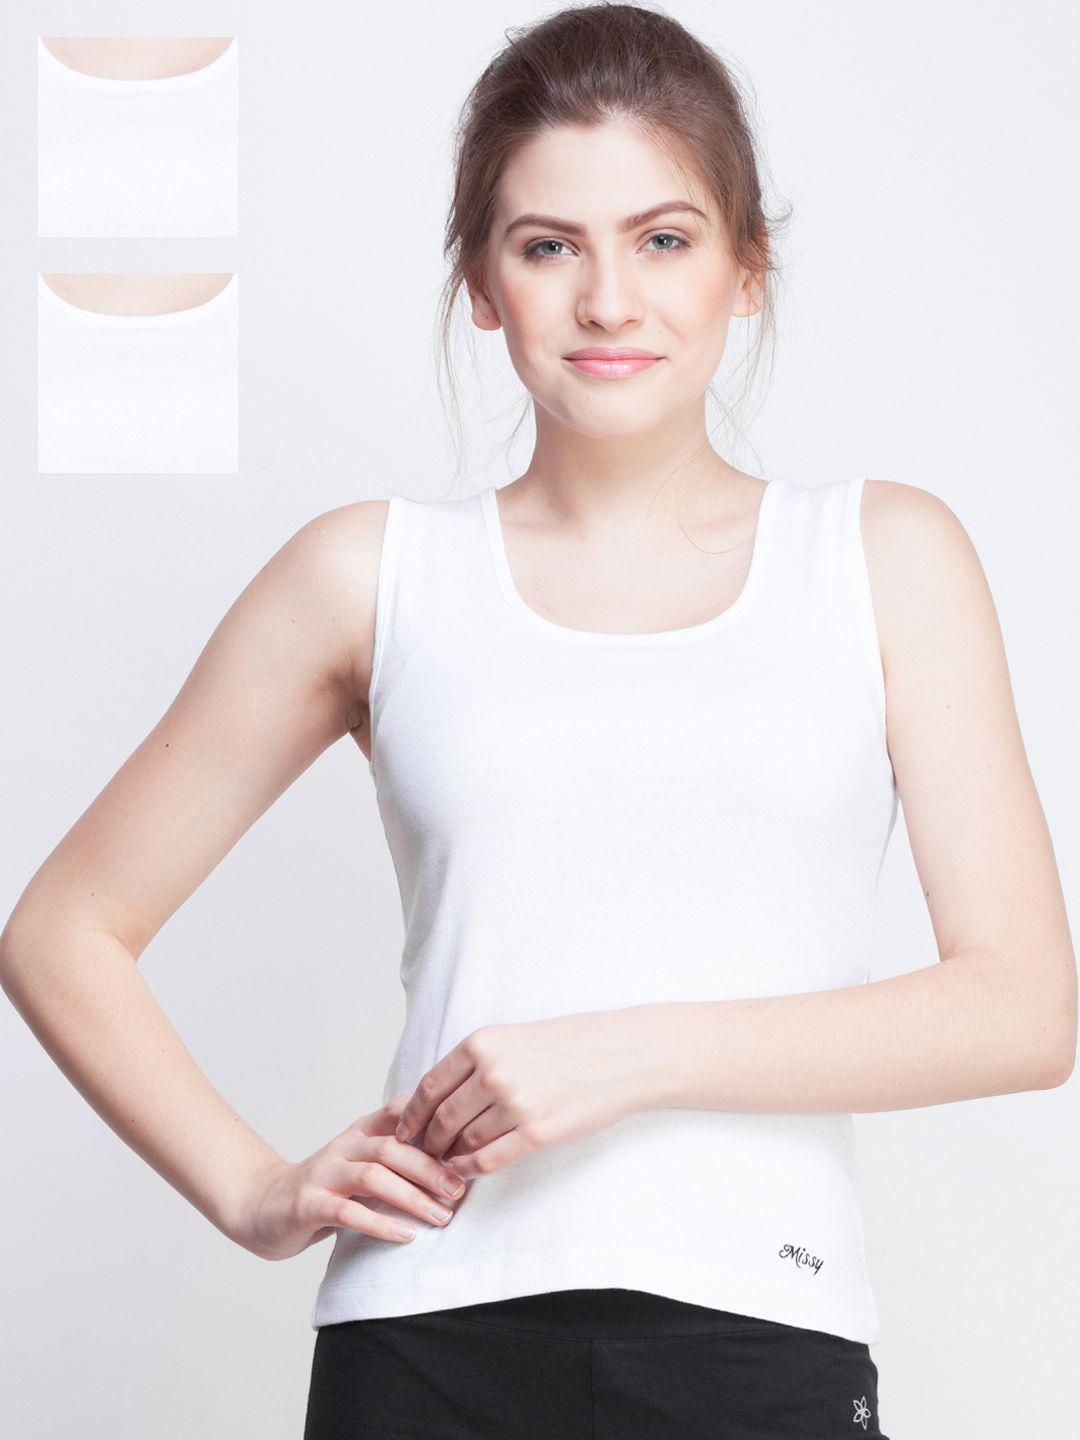 dollar-missy-pack-of-3-white-camisoles-mmbb-381